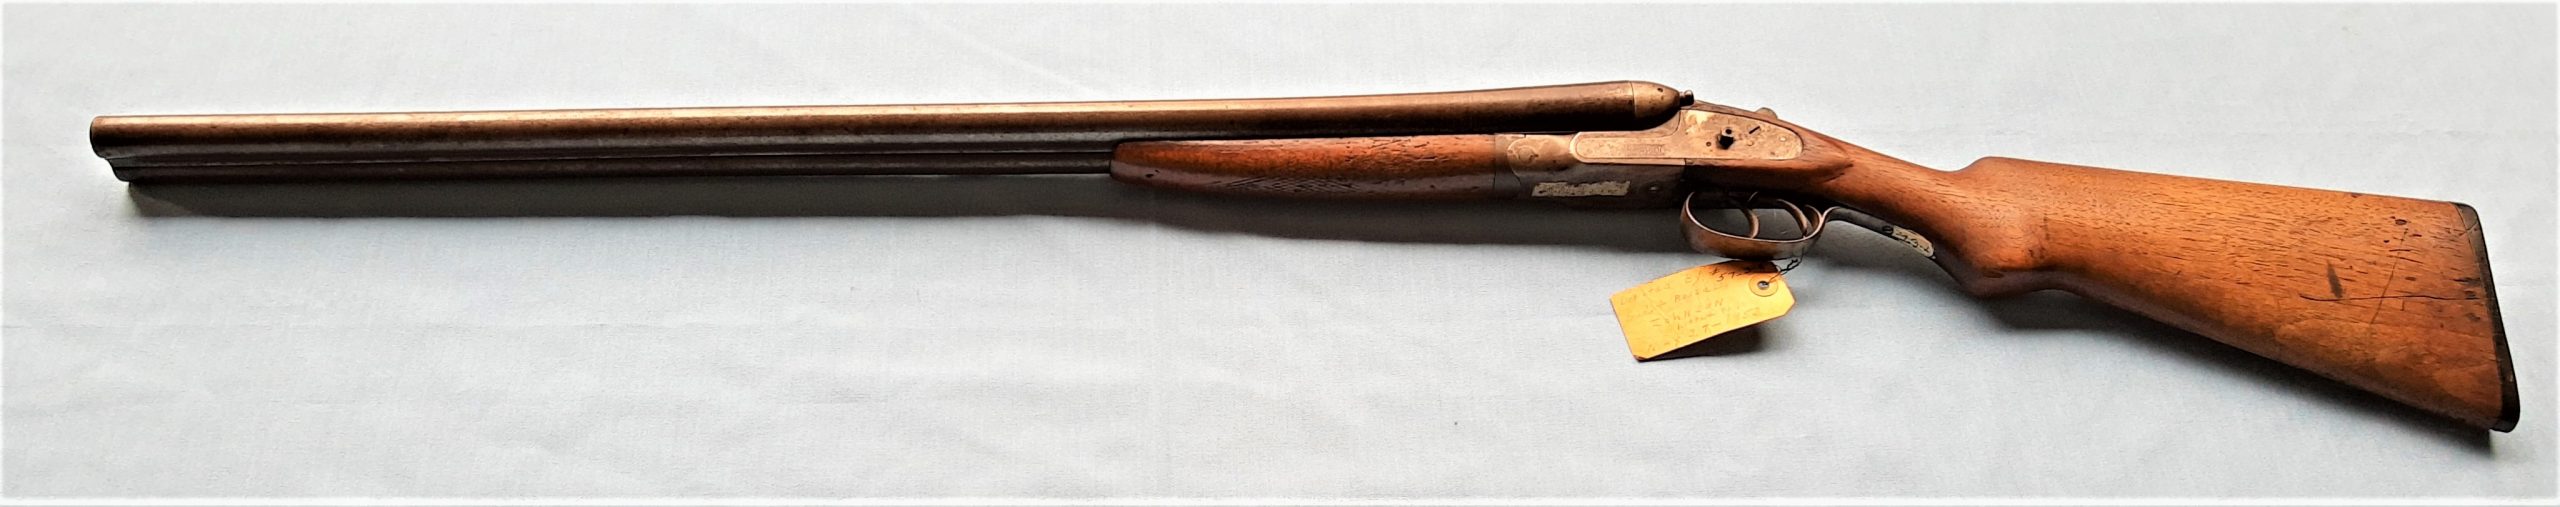 This is a 12-gauge Rev-O-Noc double-barreled shotgun, manufactured by H.S.B. & Co. in 1896. Donated by Fred and Russell Johnson, 1957 MCHS Collections #1957-3-2